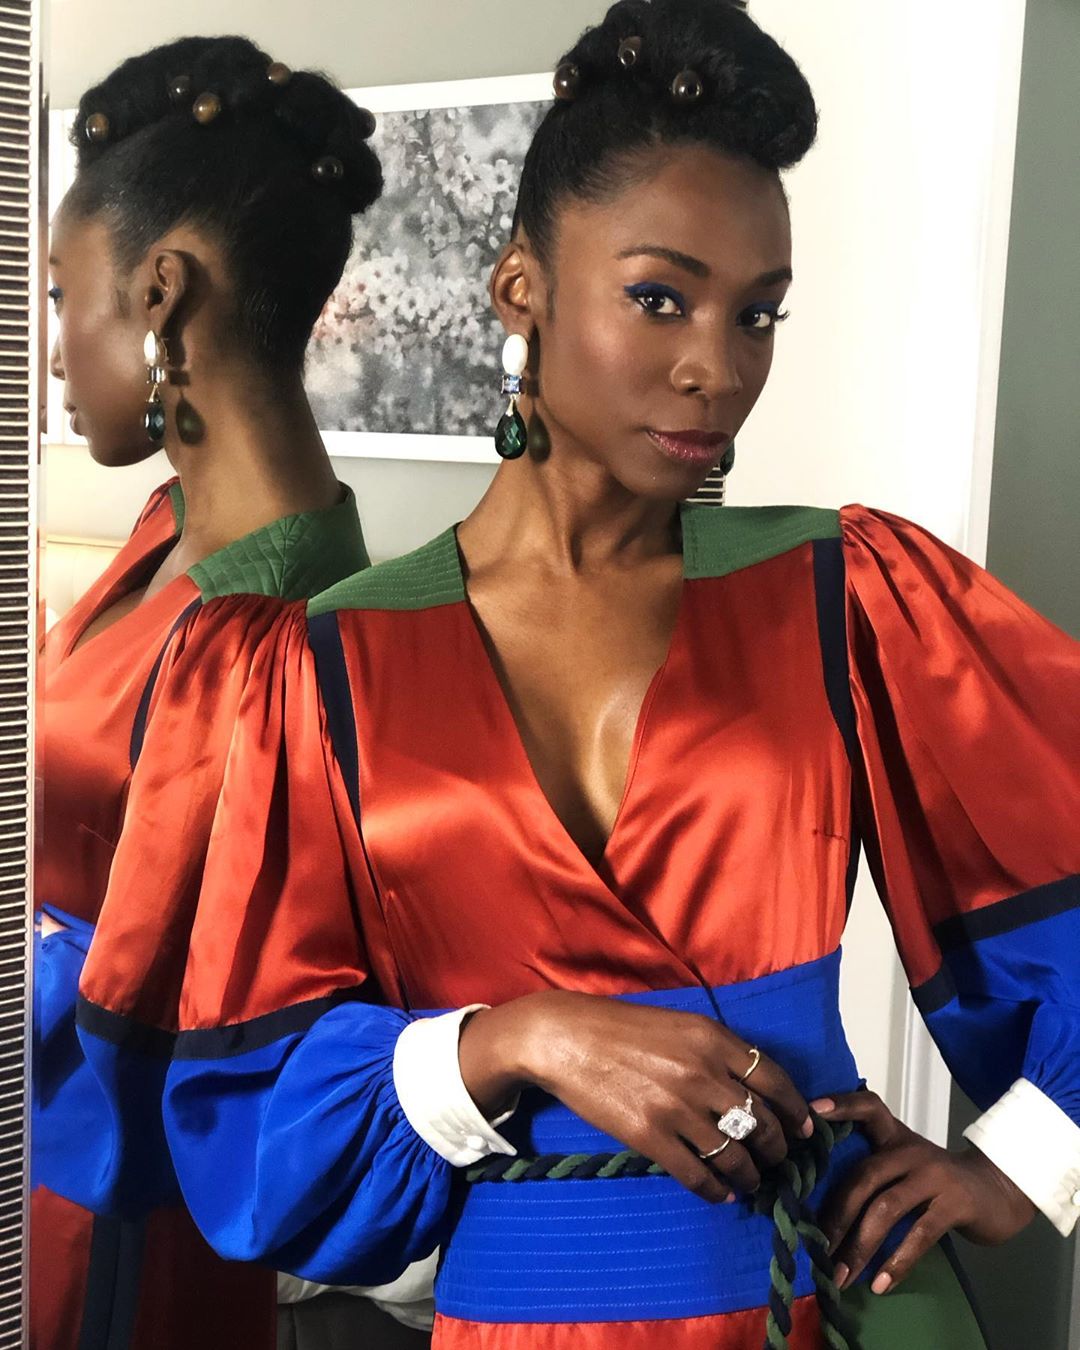 Actress and Activist Angelica Ross On Her Undeniable Purpose (and Glow)